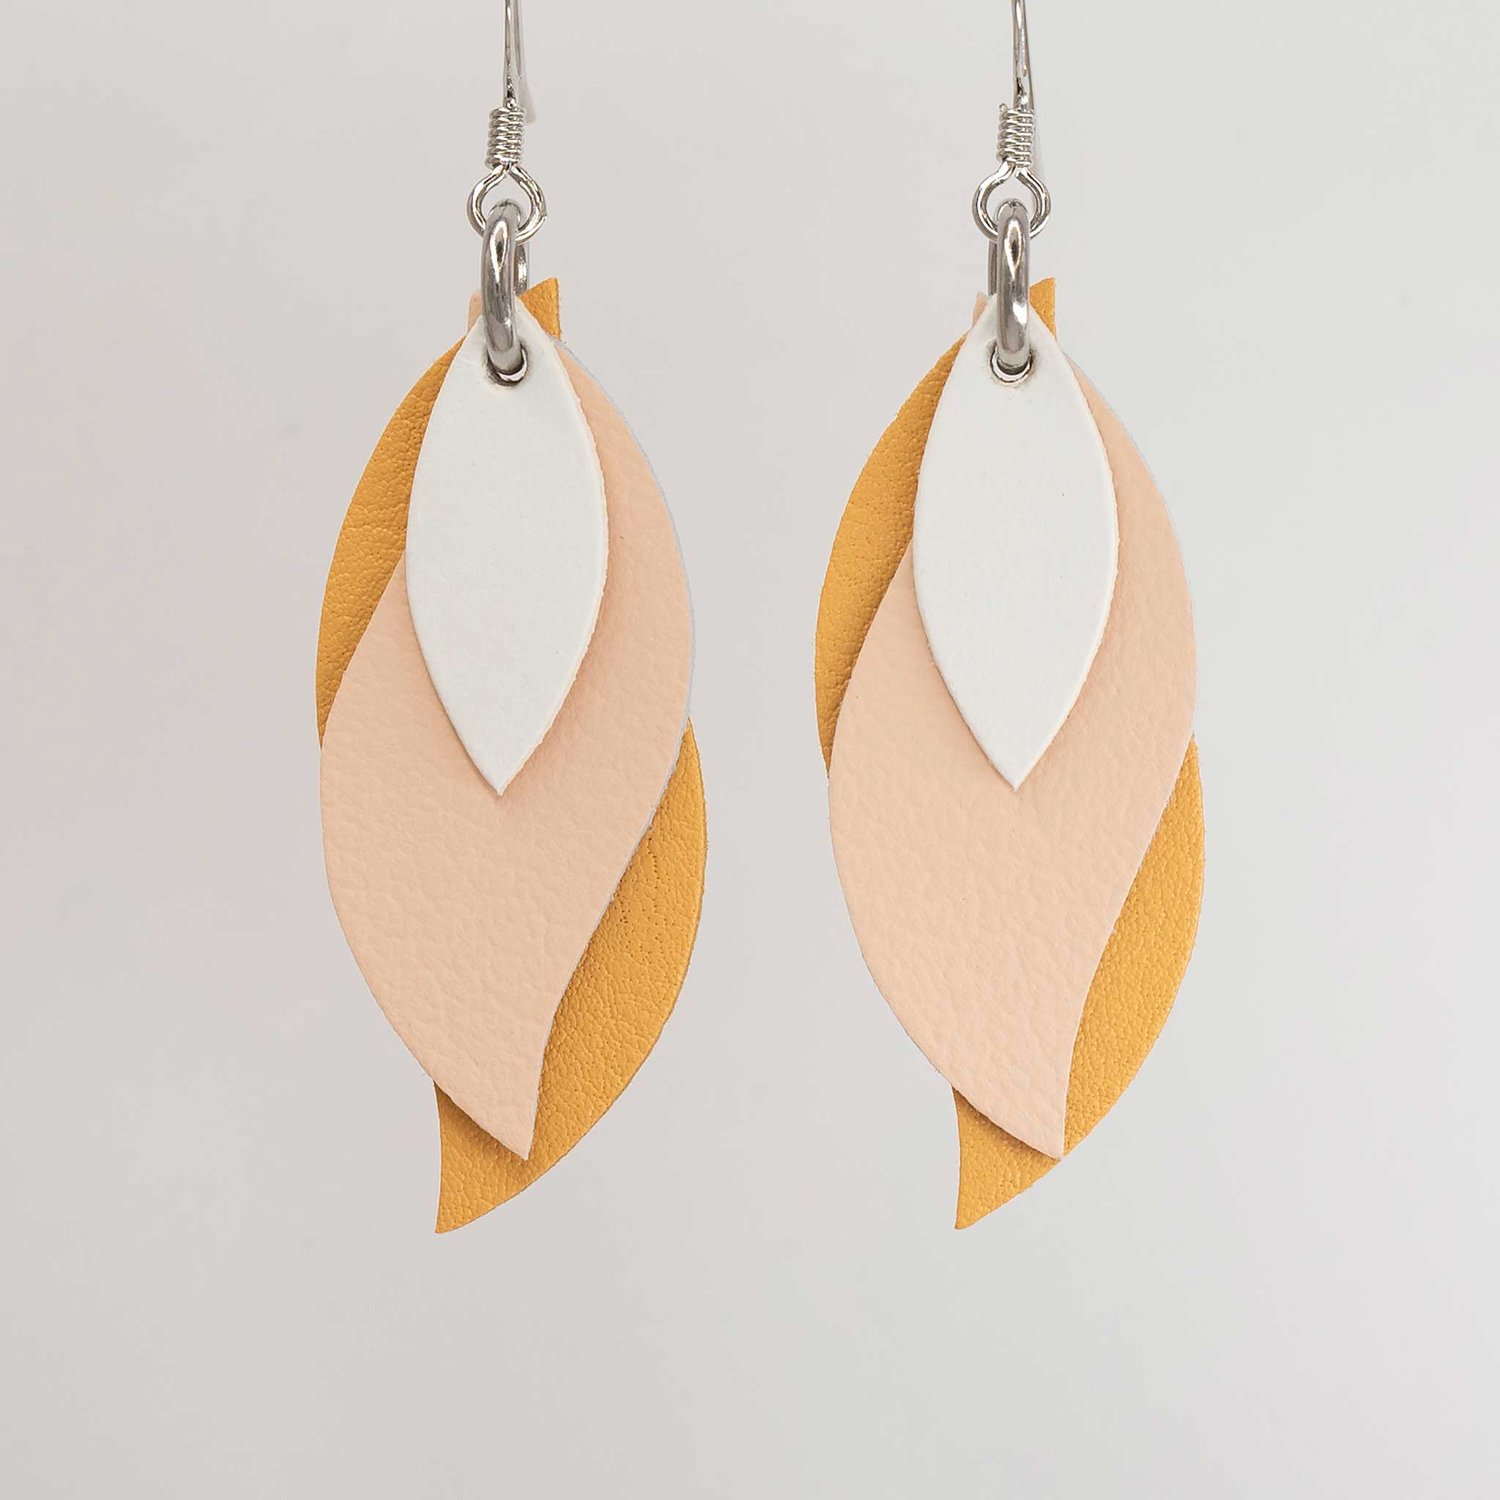 Image of Australian leather leaf earrings - White, pale peach, apricot